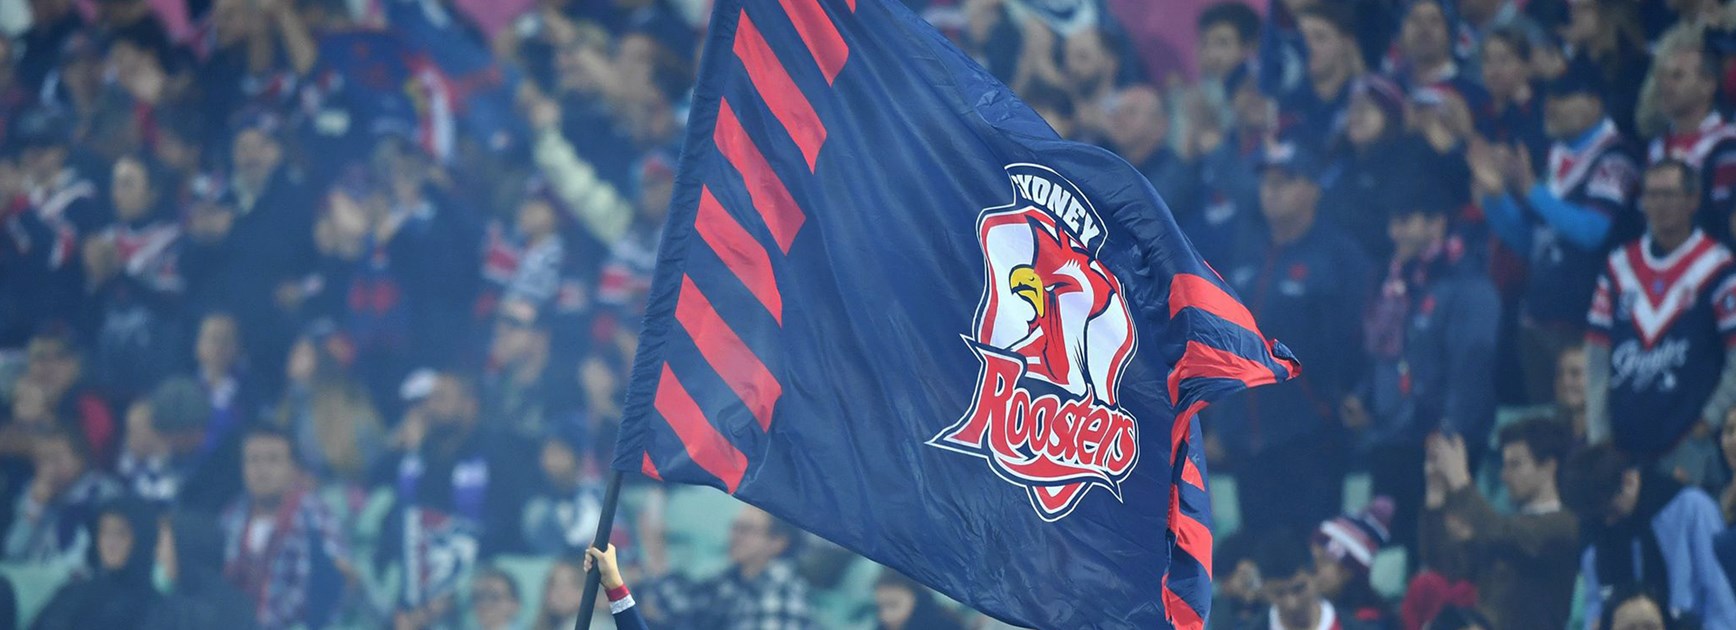 Get behind your Roosters this Friday night at the SCG